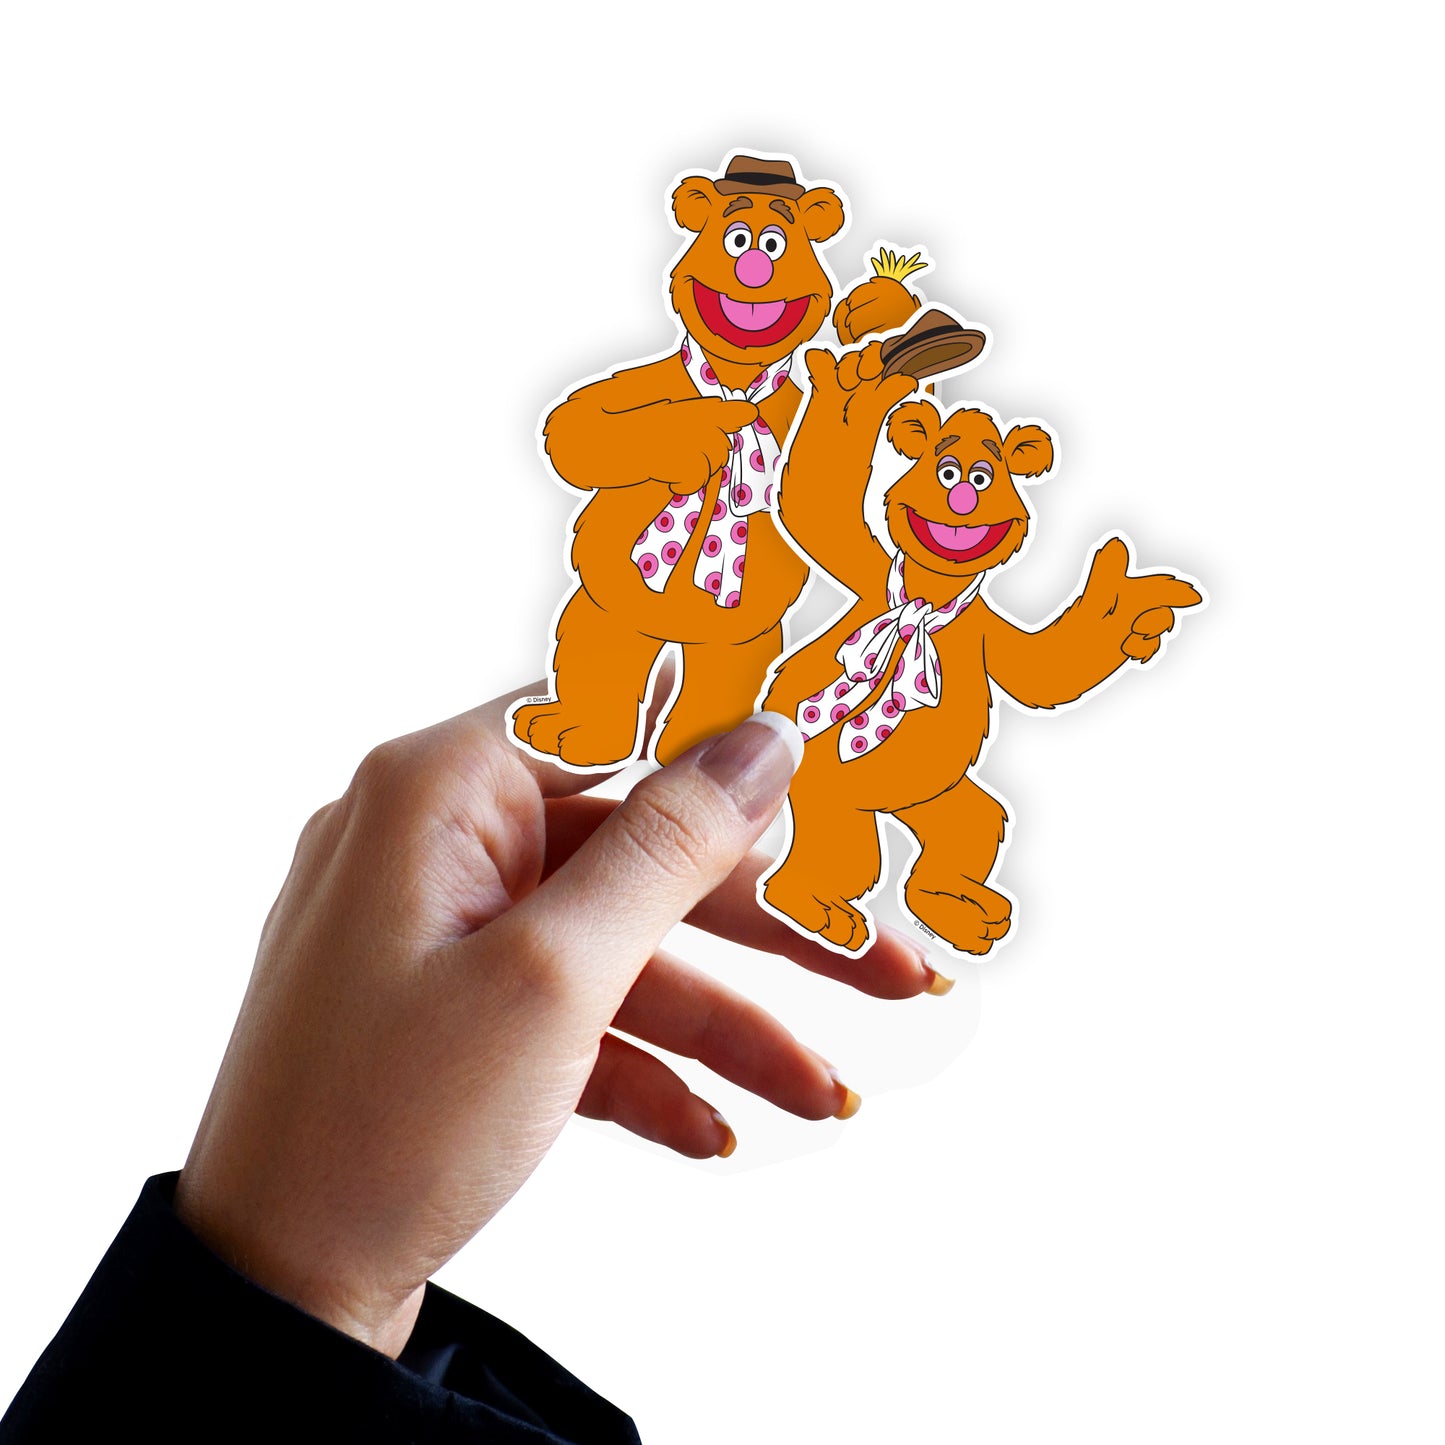 Sheet of 4 -Sheet of 4 -The Muppets: Fozzie Bear Minis        - Officially Licensed Disney Removable     Adhesive Decal